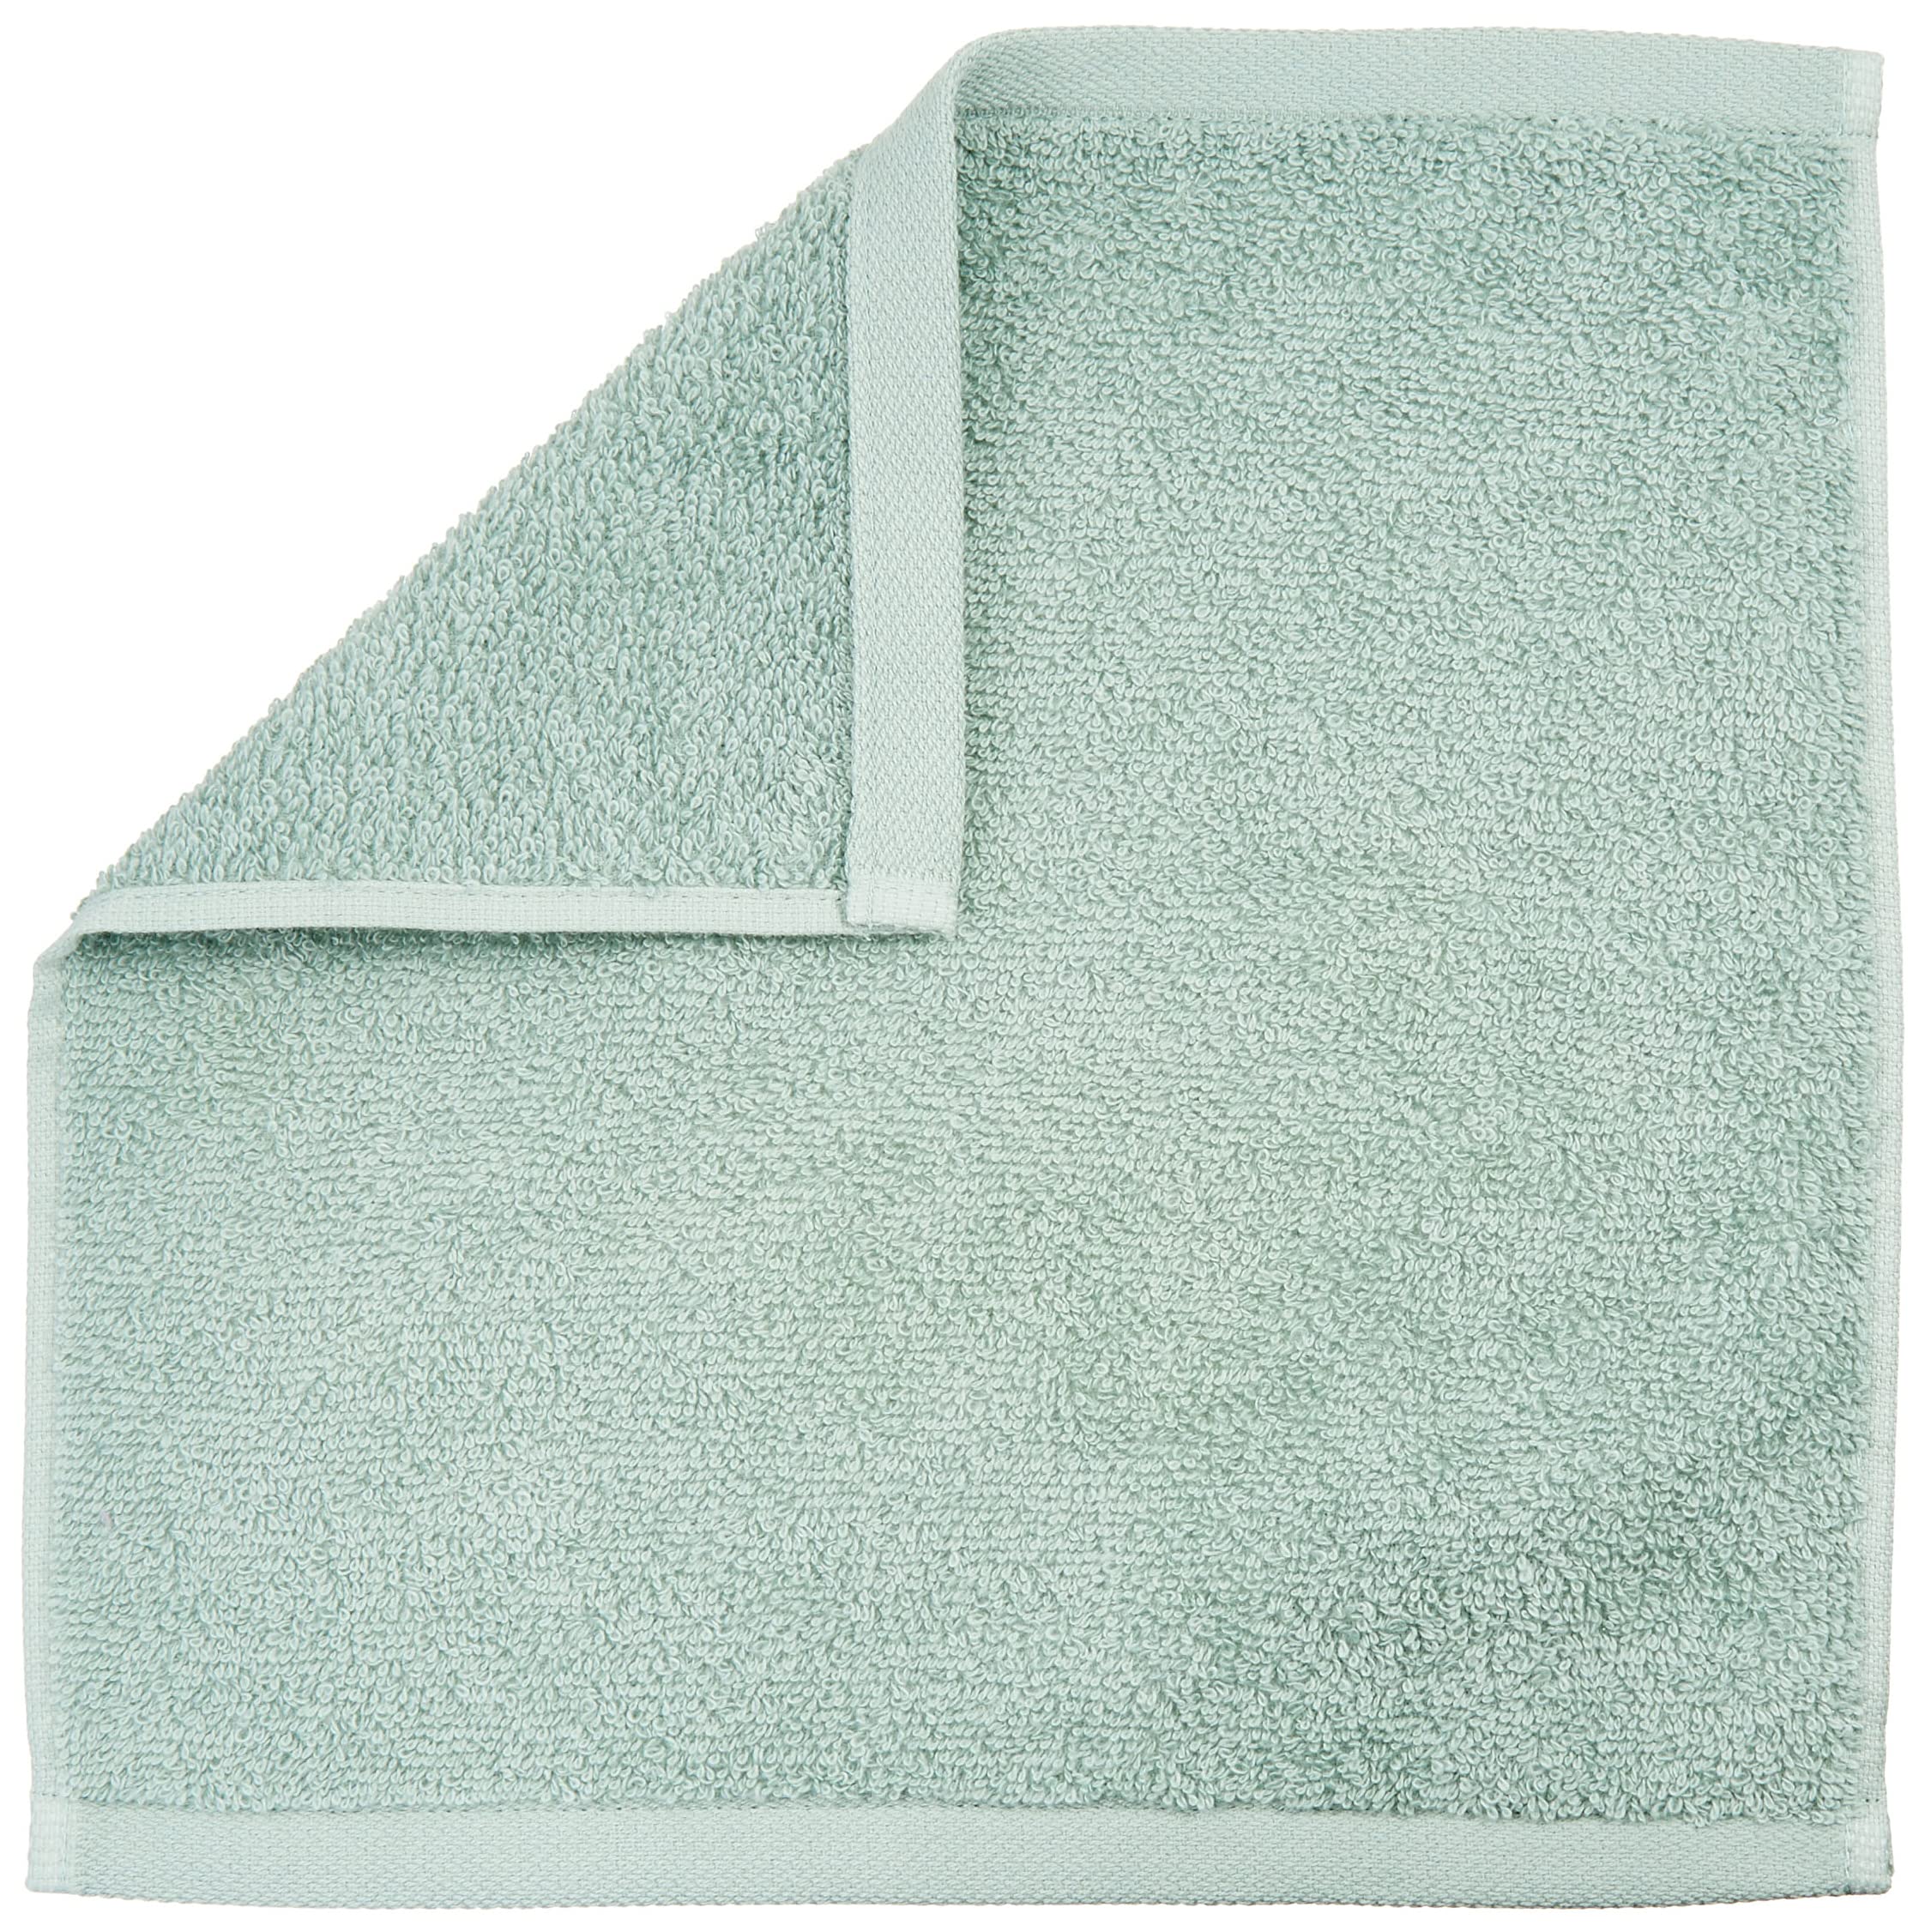 Amazon Basics Fast Drying, Extra Absorbent, Terry Cotton Washcloths - Pack of 24, Seafoam Green/Ice Blue/White, 12 x 12-Inch